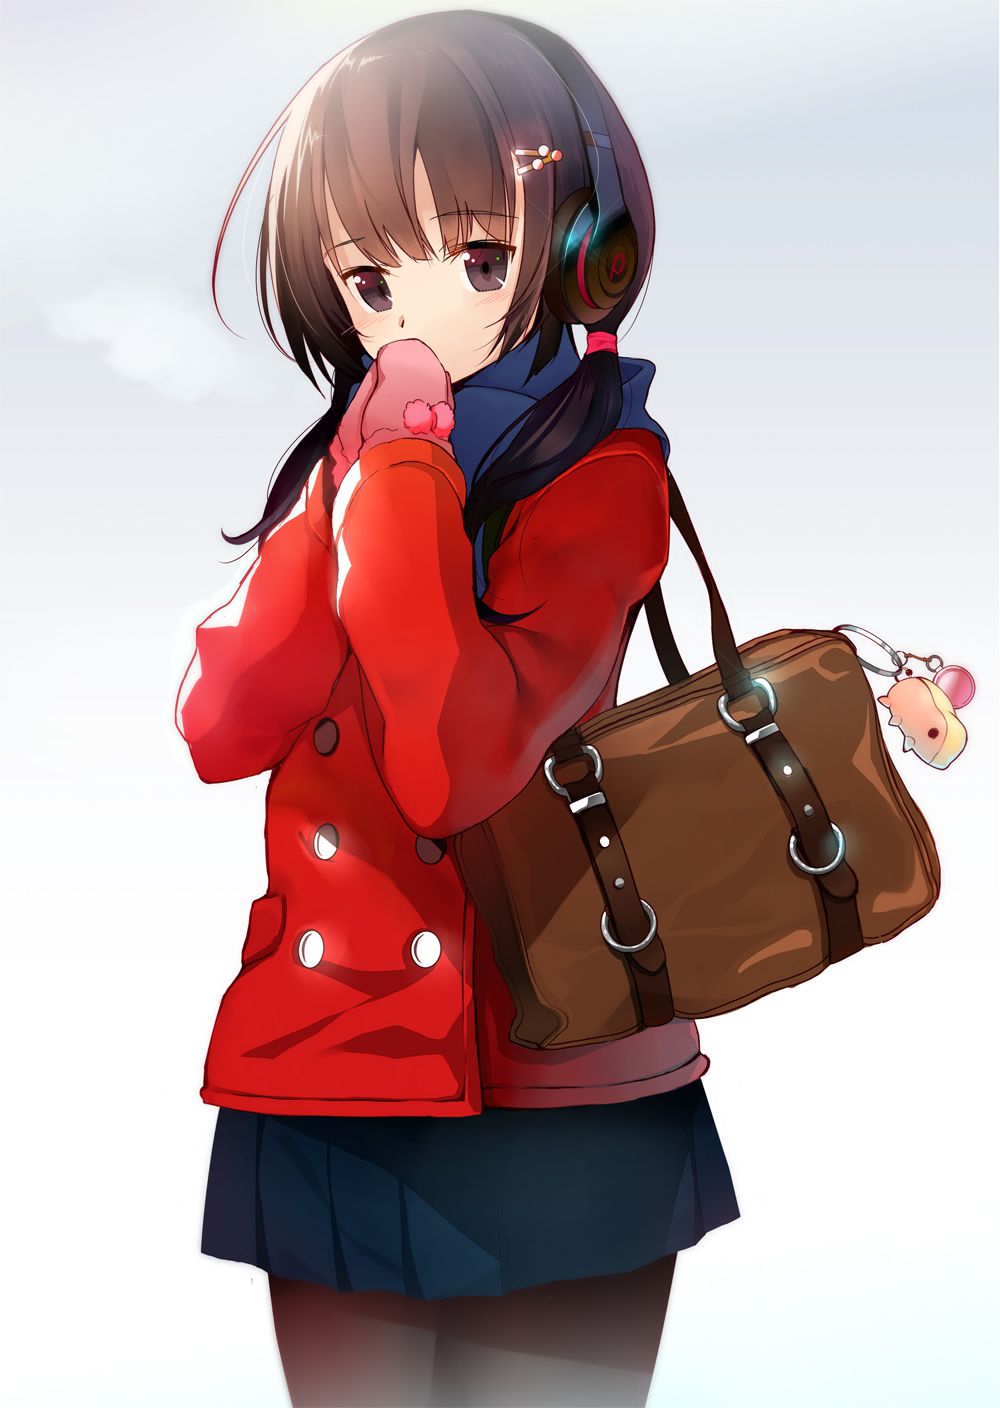 [Secondary] headphones x girl cute picture! 5